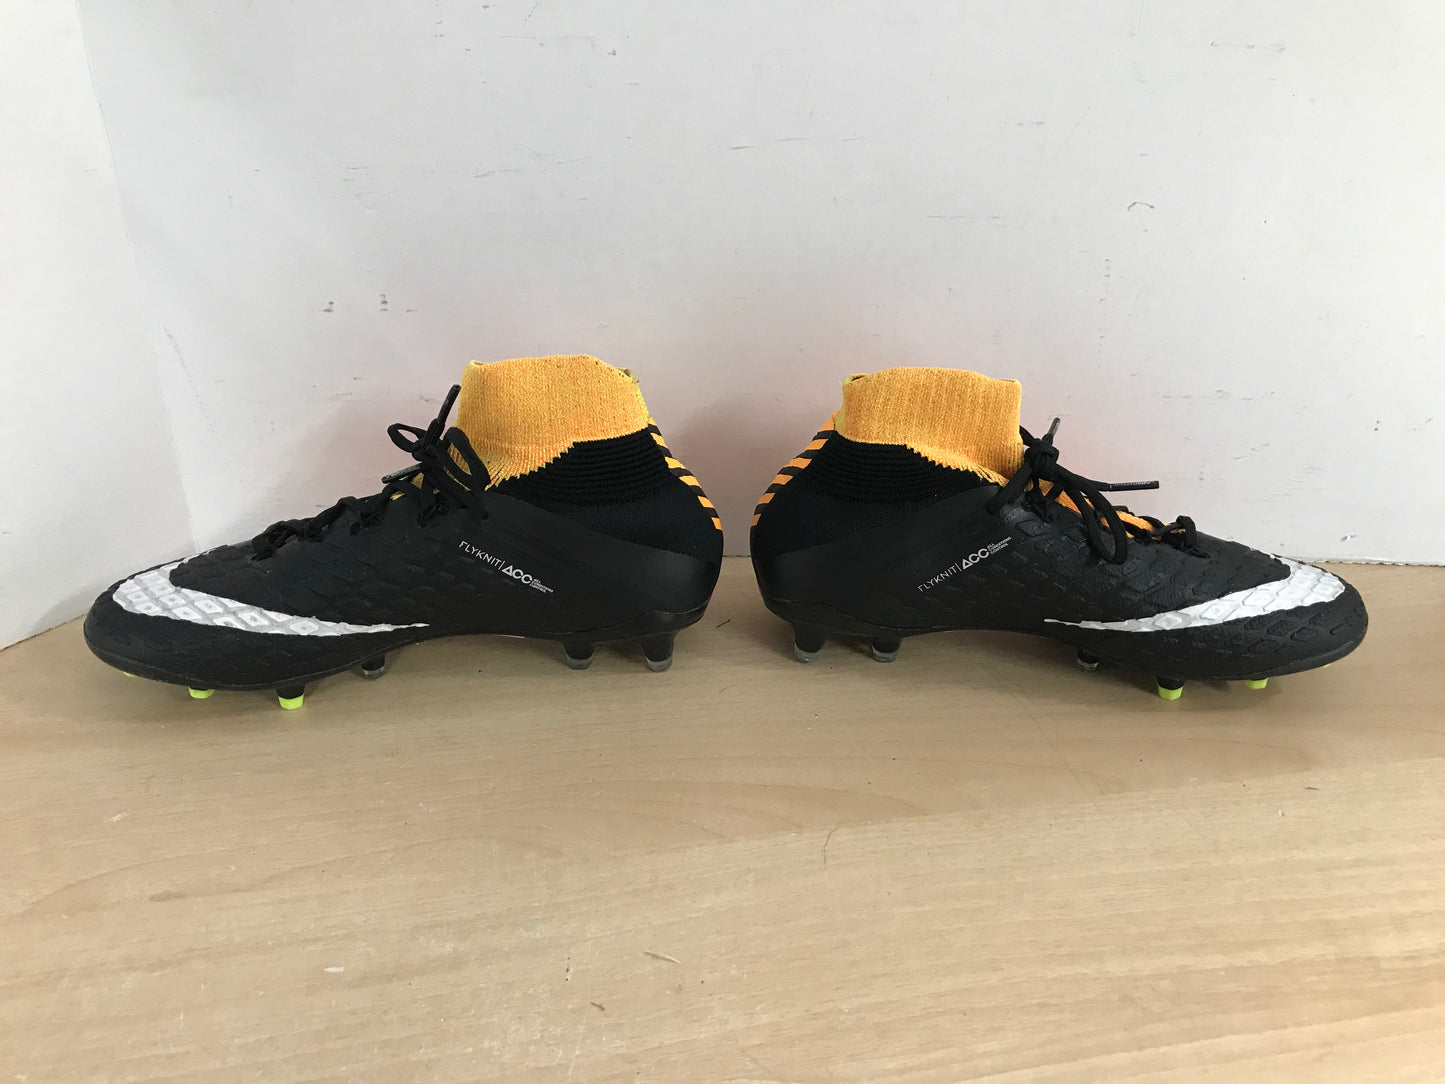 Soccer Shoes Cleats Child Size 6 Nike Flykniti Slipper Foot Youth Black Orange Yellow Excellent